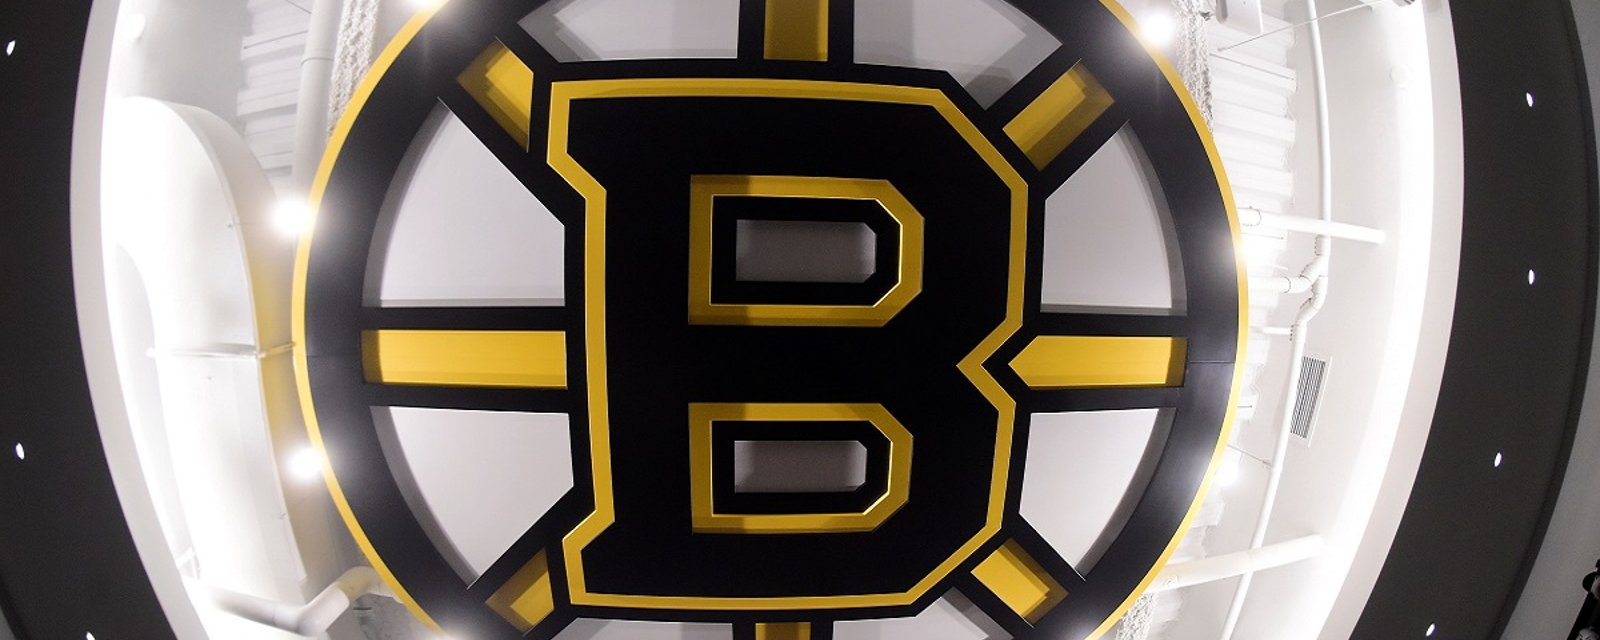  Breaking: Bruins admit they are looking for another coach.